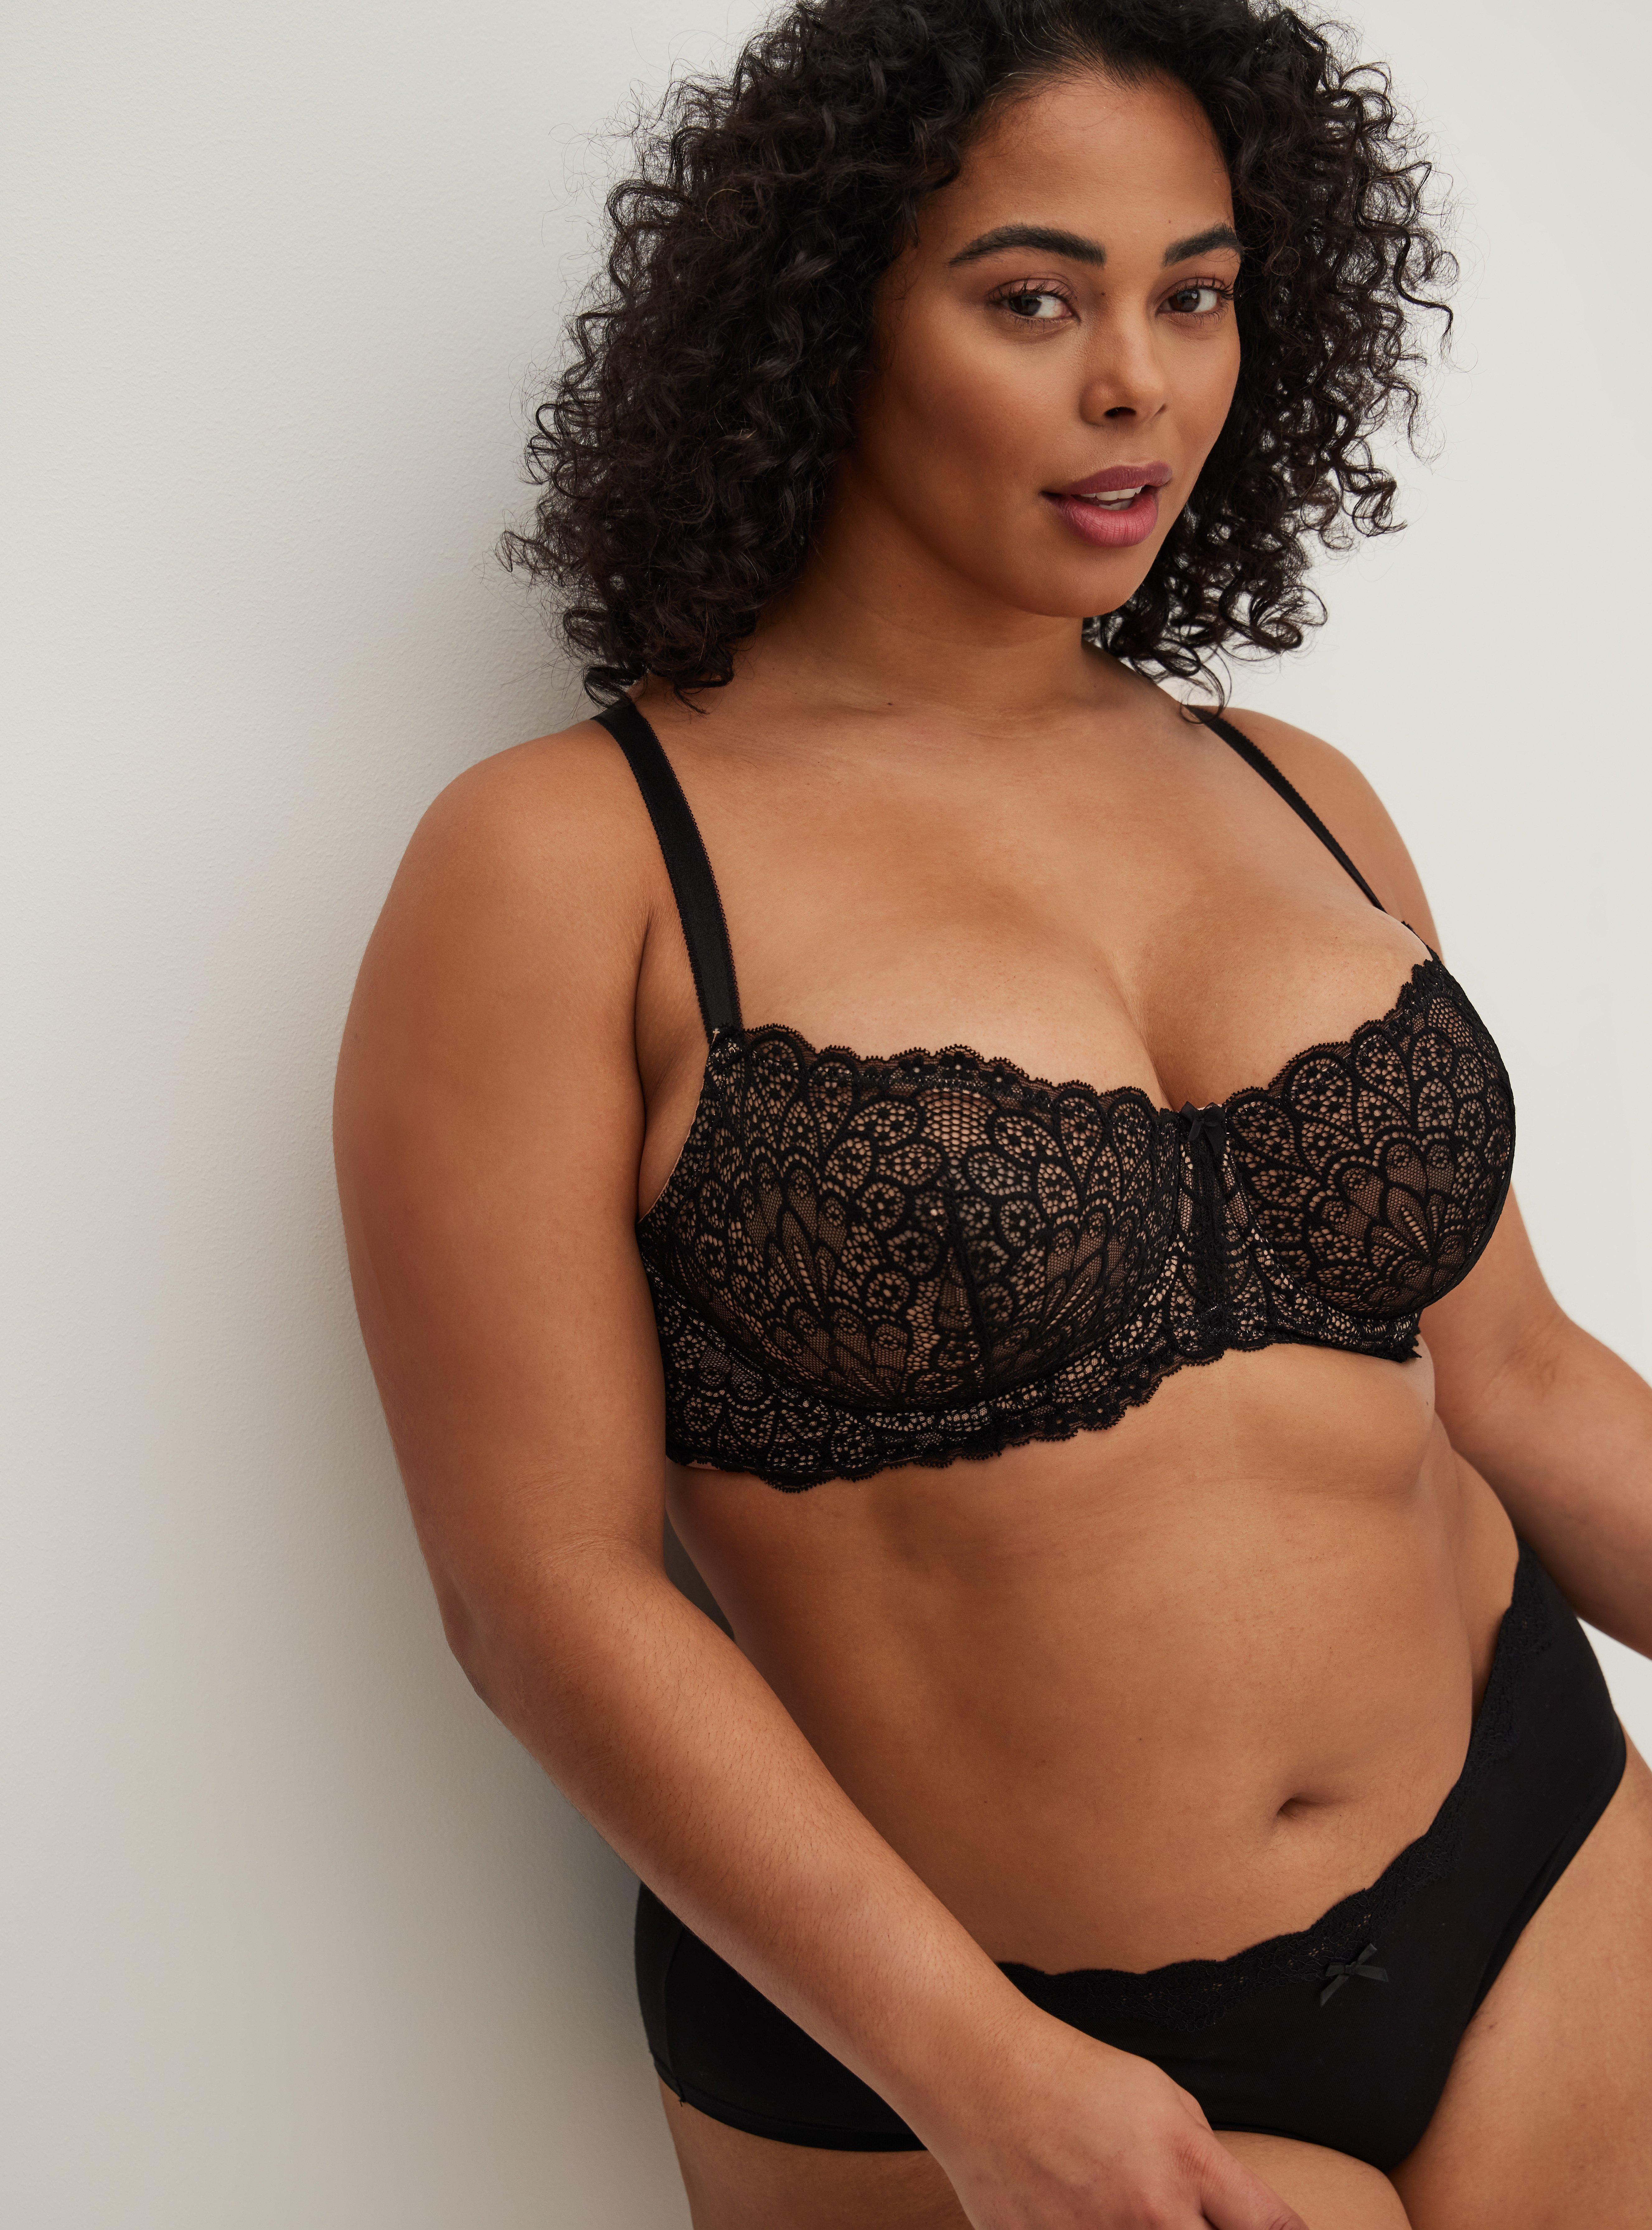 Torrid Curve tan nude lace bra - 44G Size undefined - $25 - From